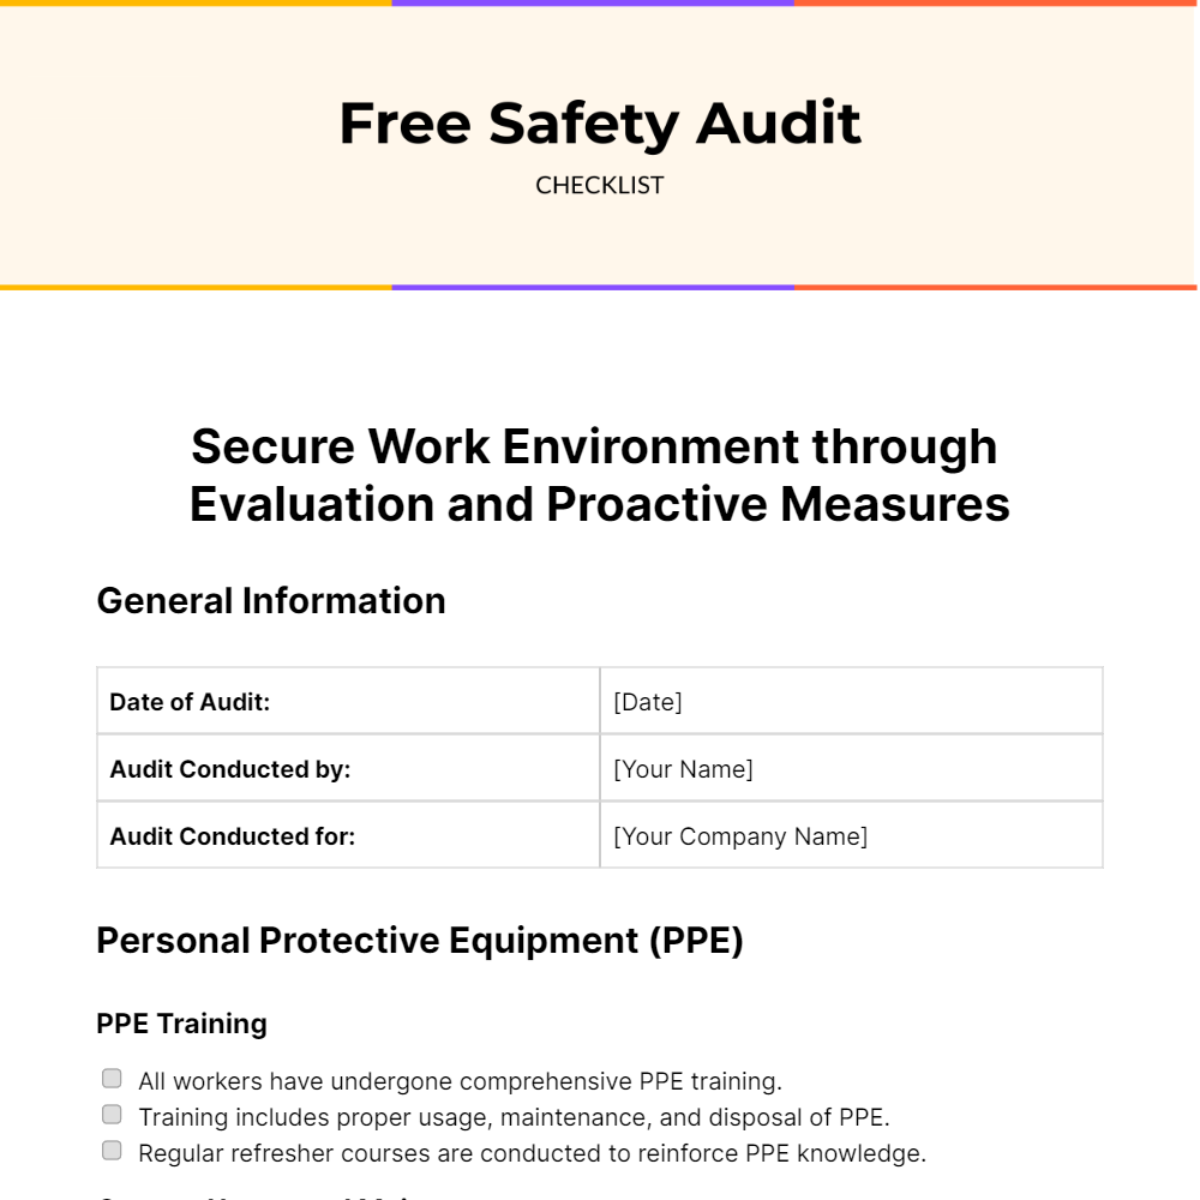 Free Safety Audit Checklist Template